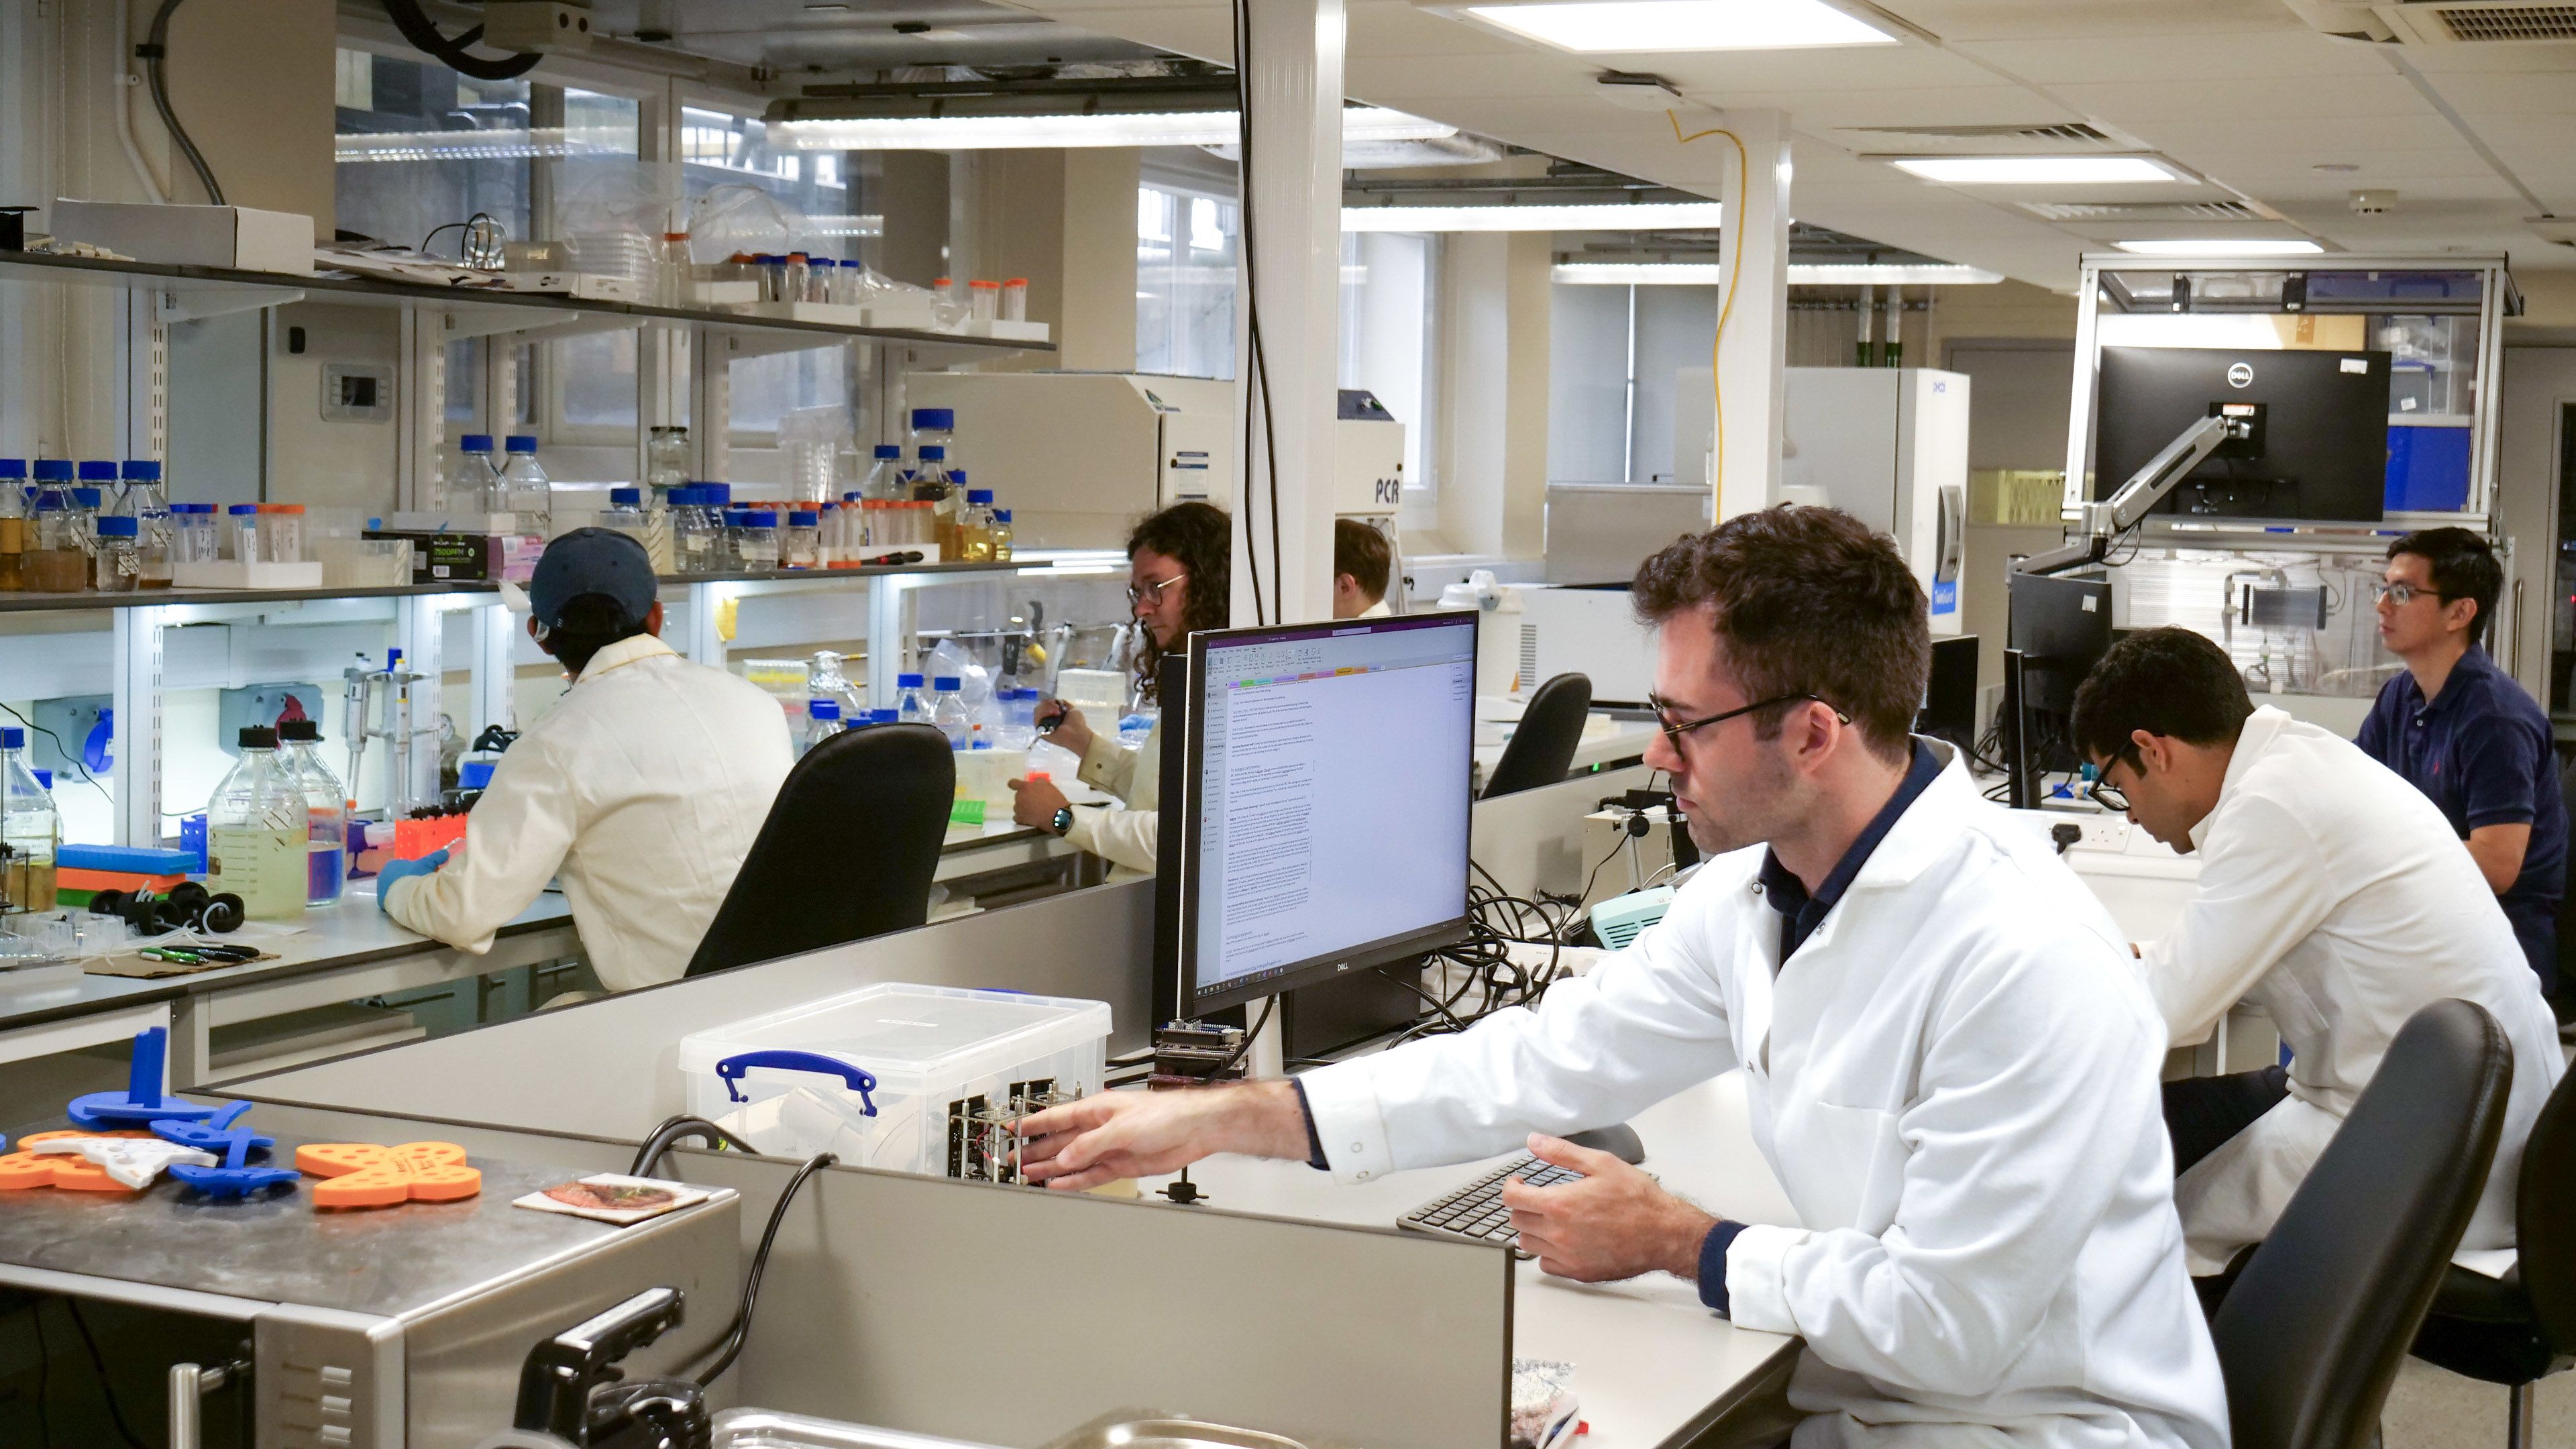 six researchers wearing lab coats sit at benches in a laboratory. Some are working at computer screens, others are carrying out experiments.